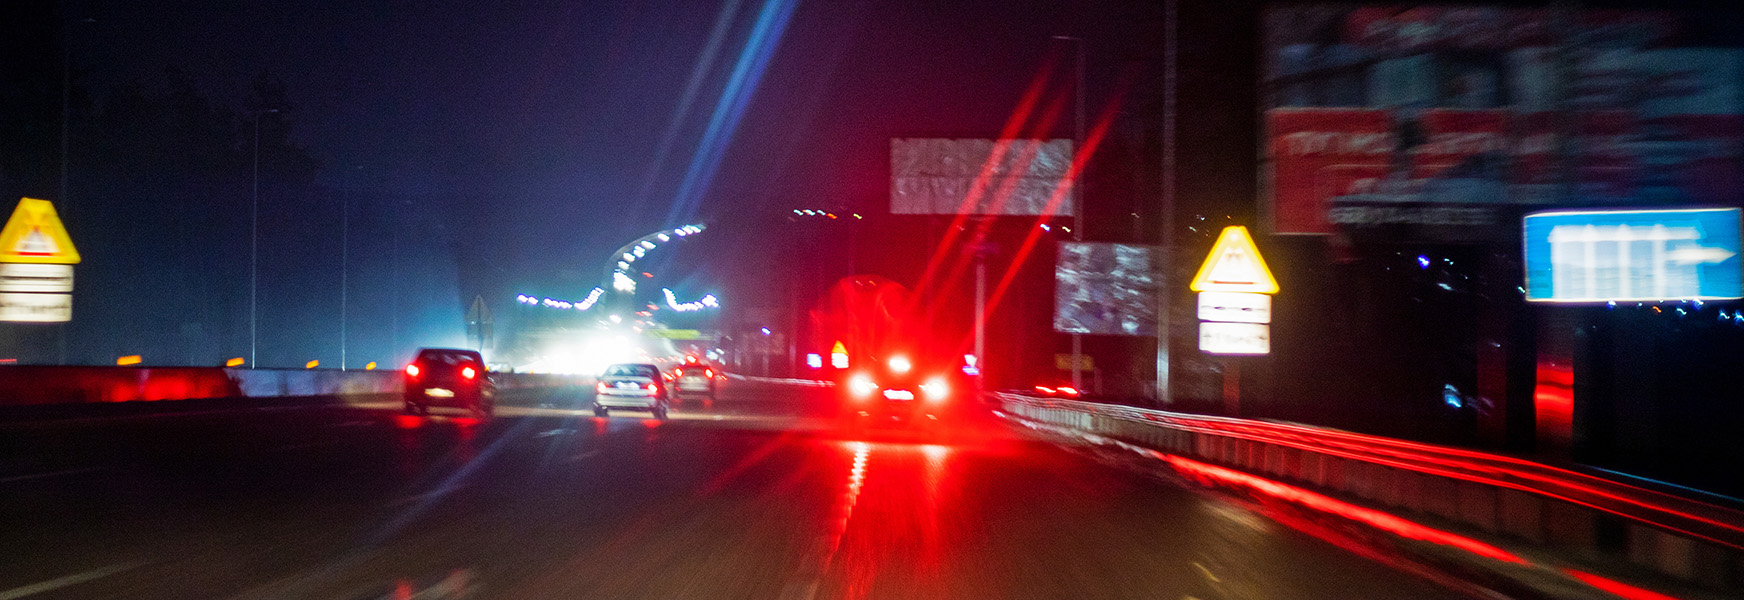 Poor vision on highway roads at night